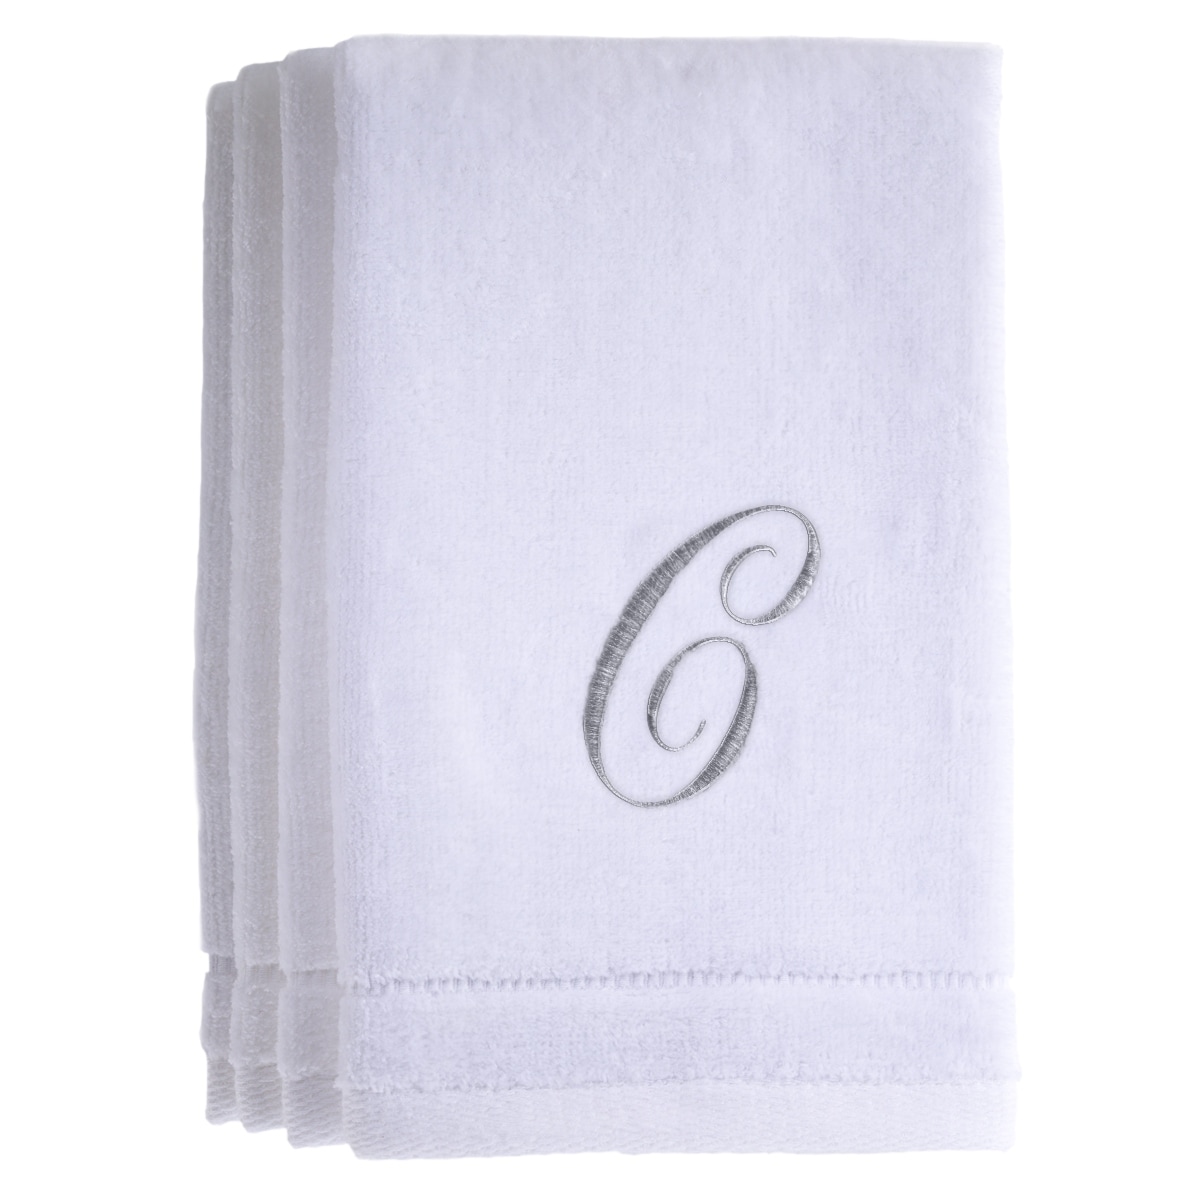 https://ak1.ostkcdn.com/images/products/is/images/direct/2935ddadf356746e68f3e3f2747dba5b944159f4/Monogrammed-White-Fingertip-Towels-Set-of-4.jpg